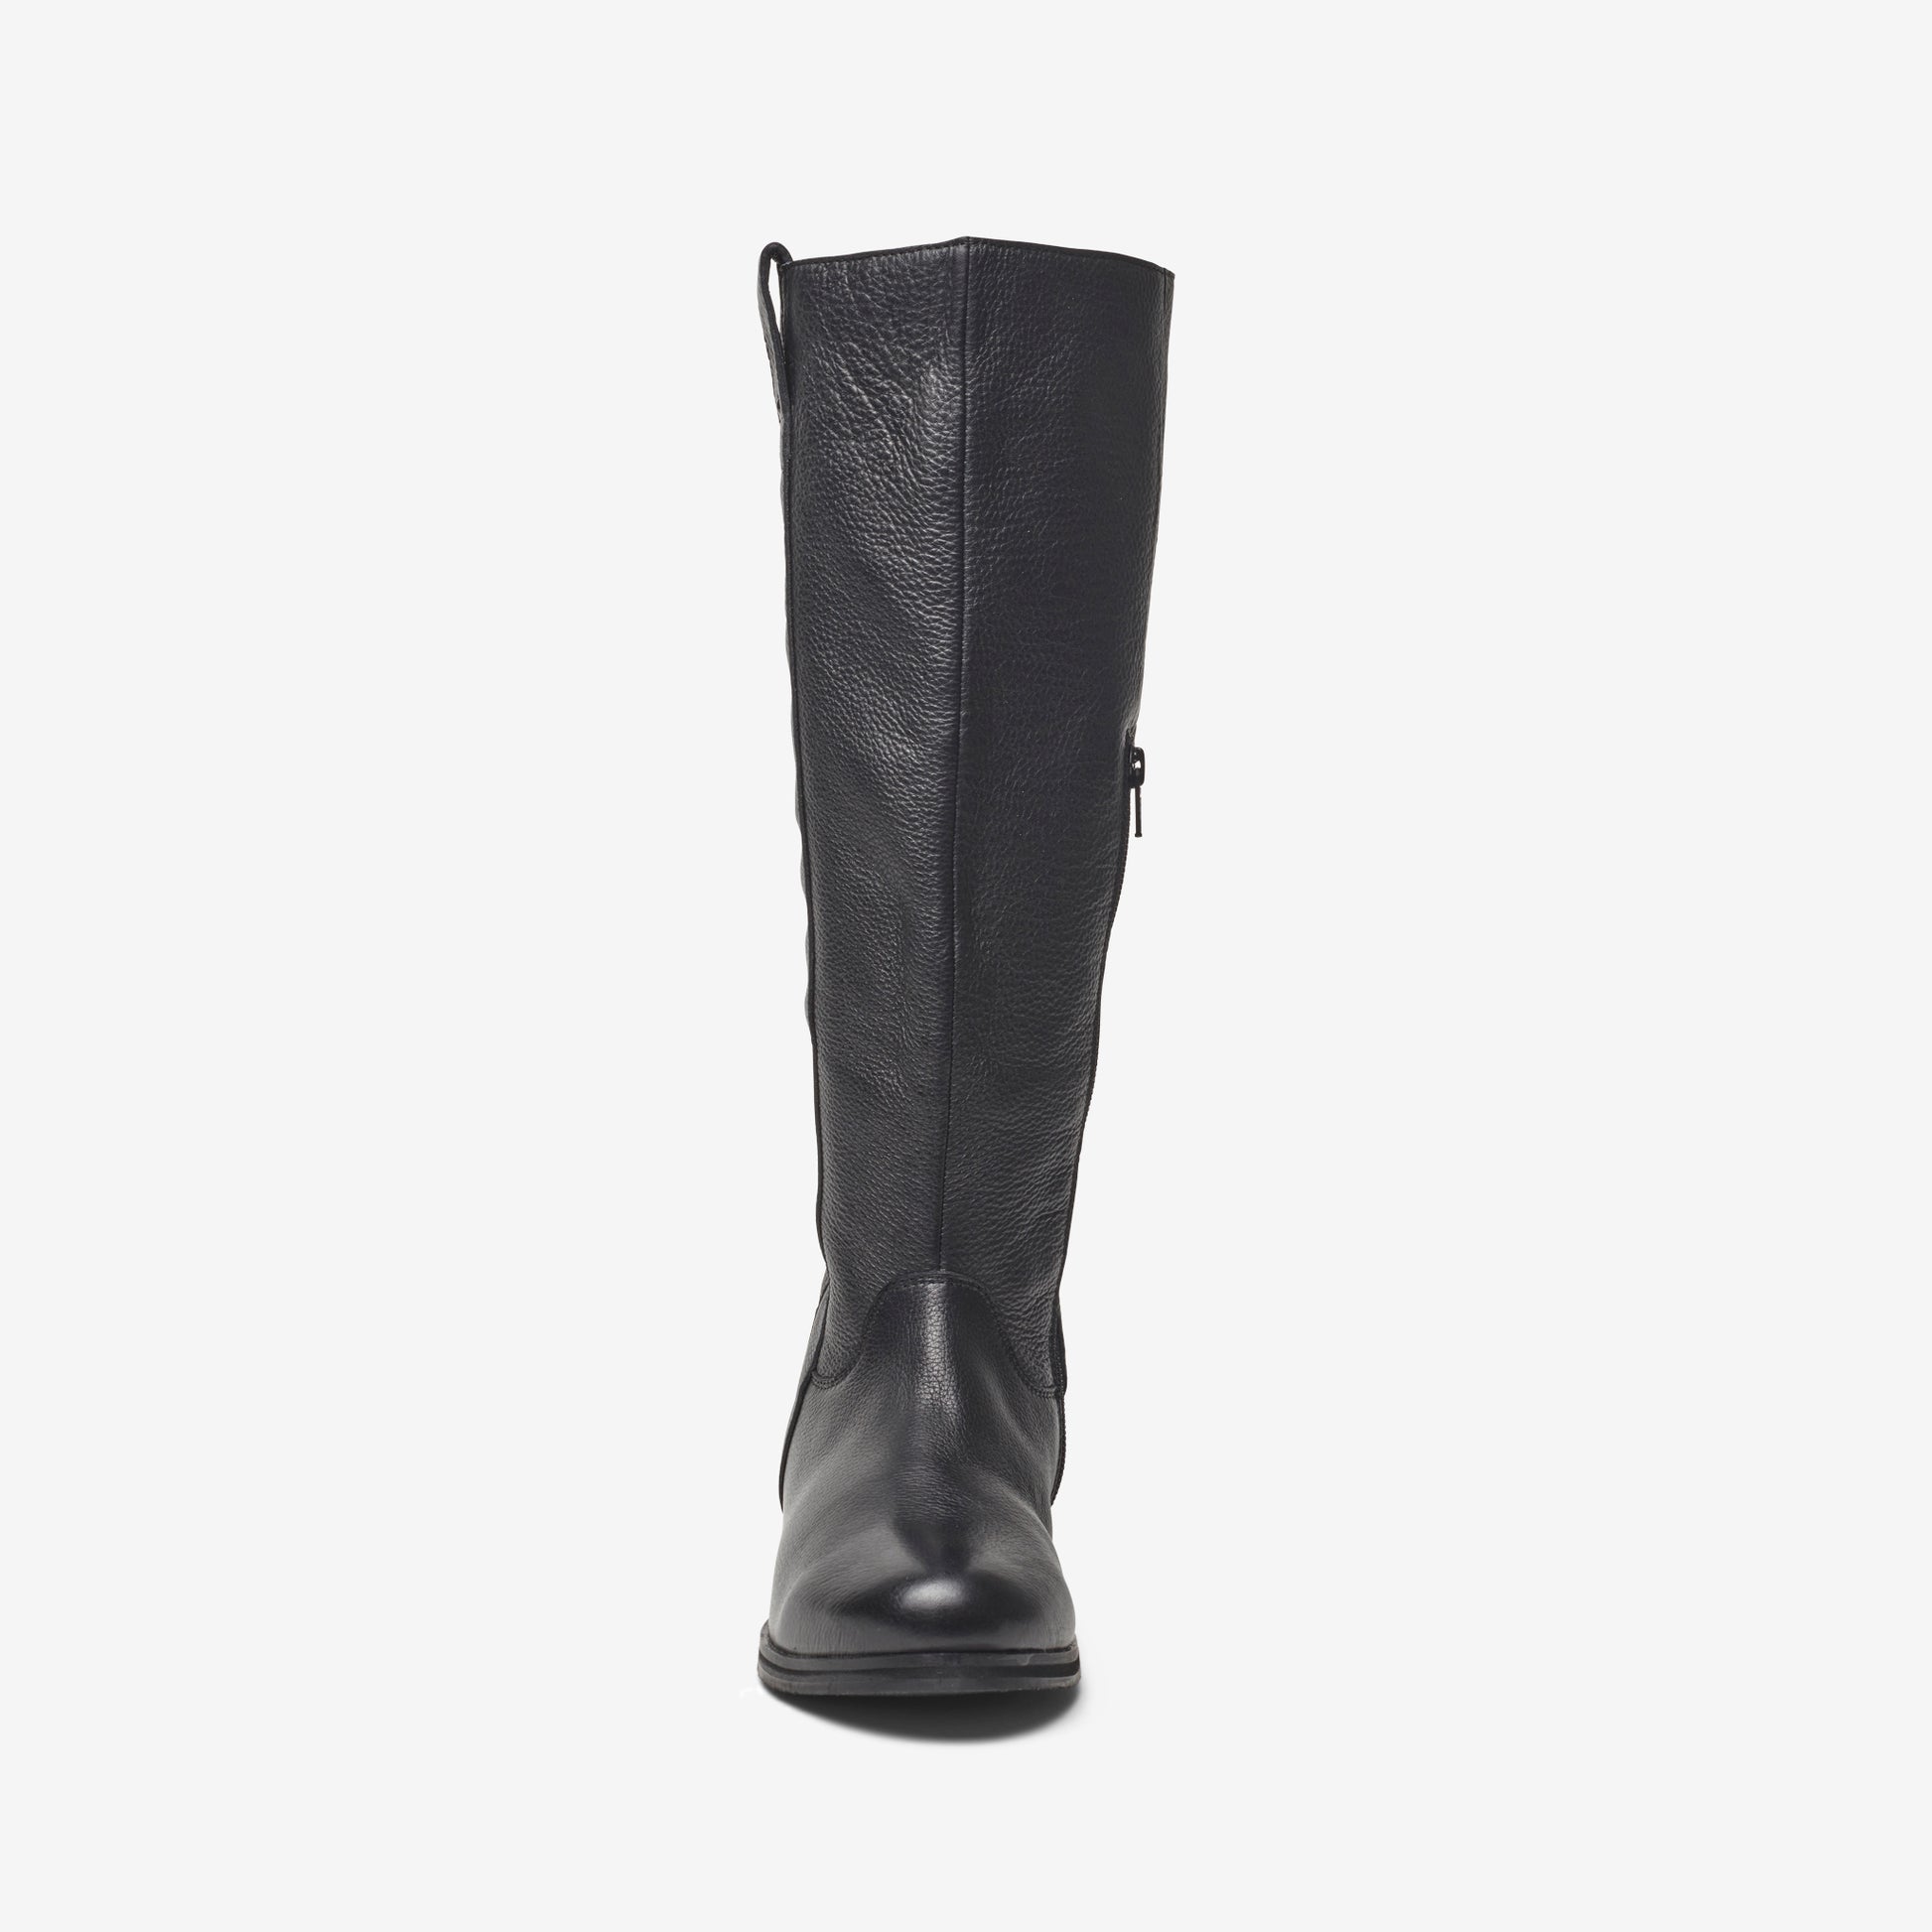 Front view of leather wide calf knee high boot